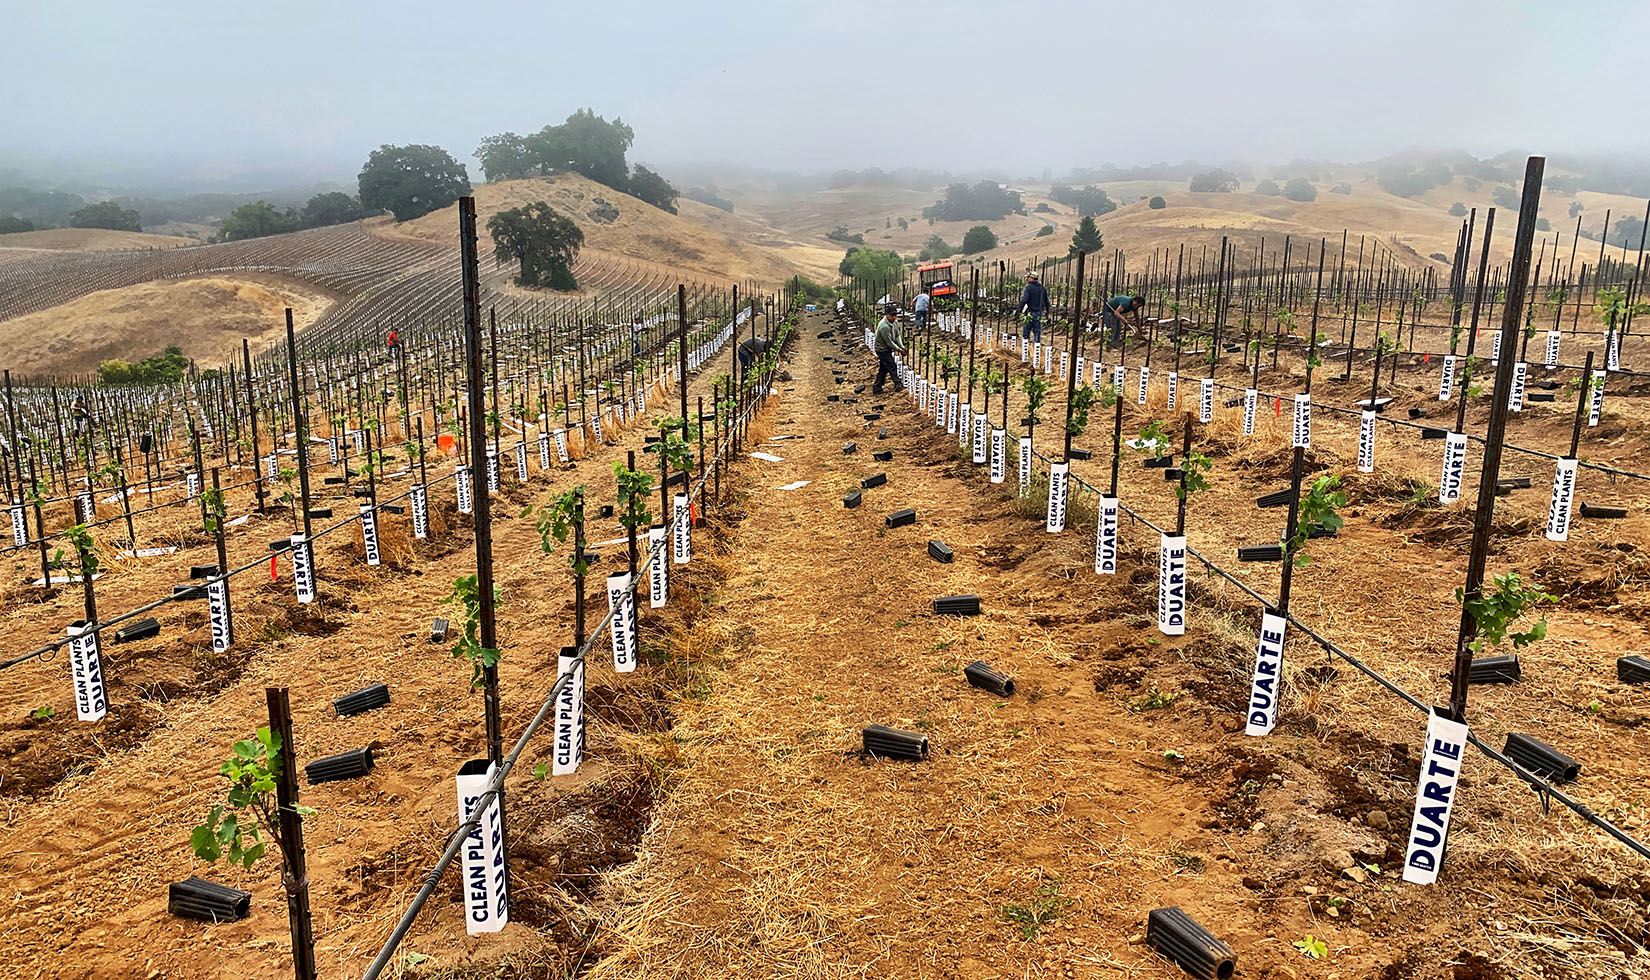 Newly replanted vineyard with white boxes around vines